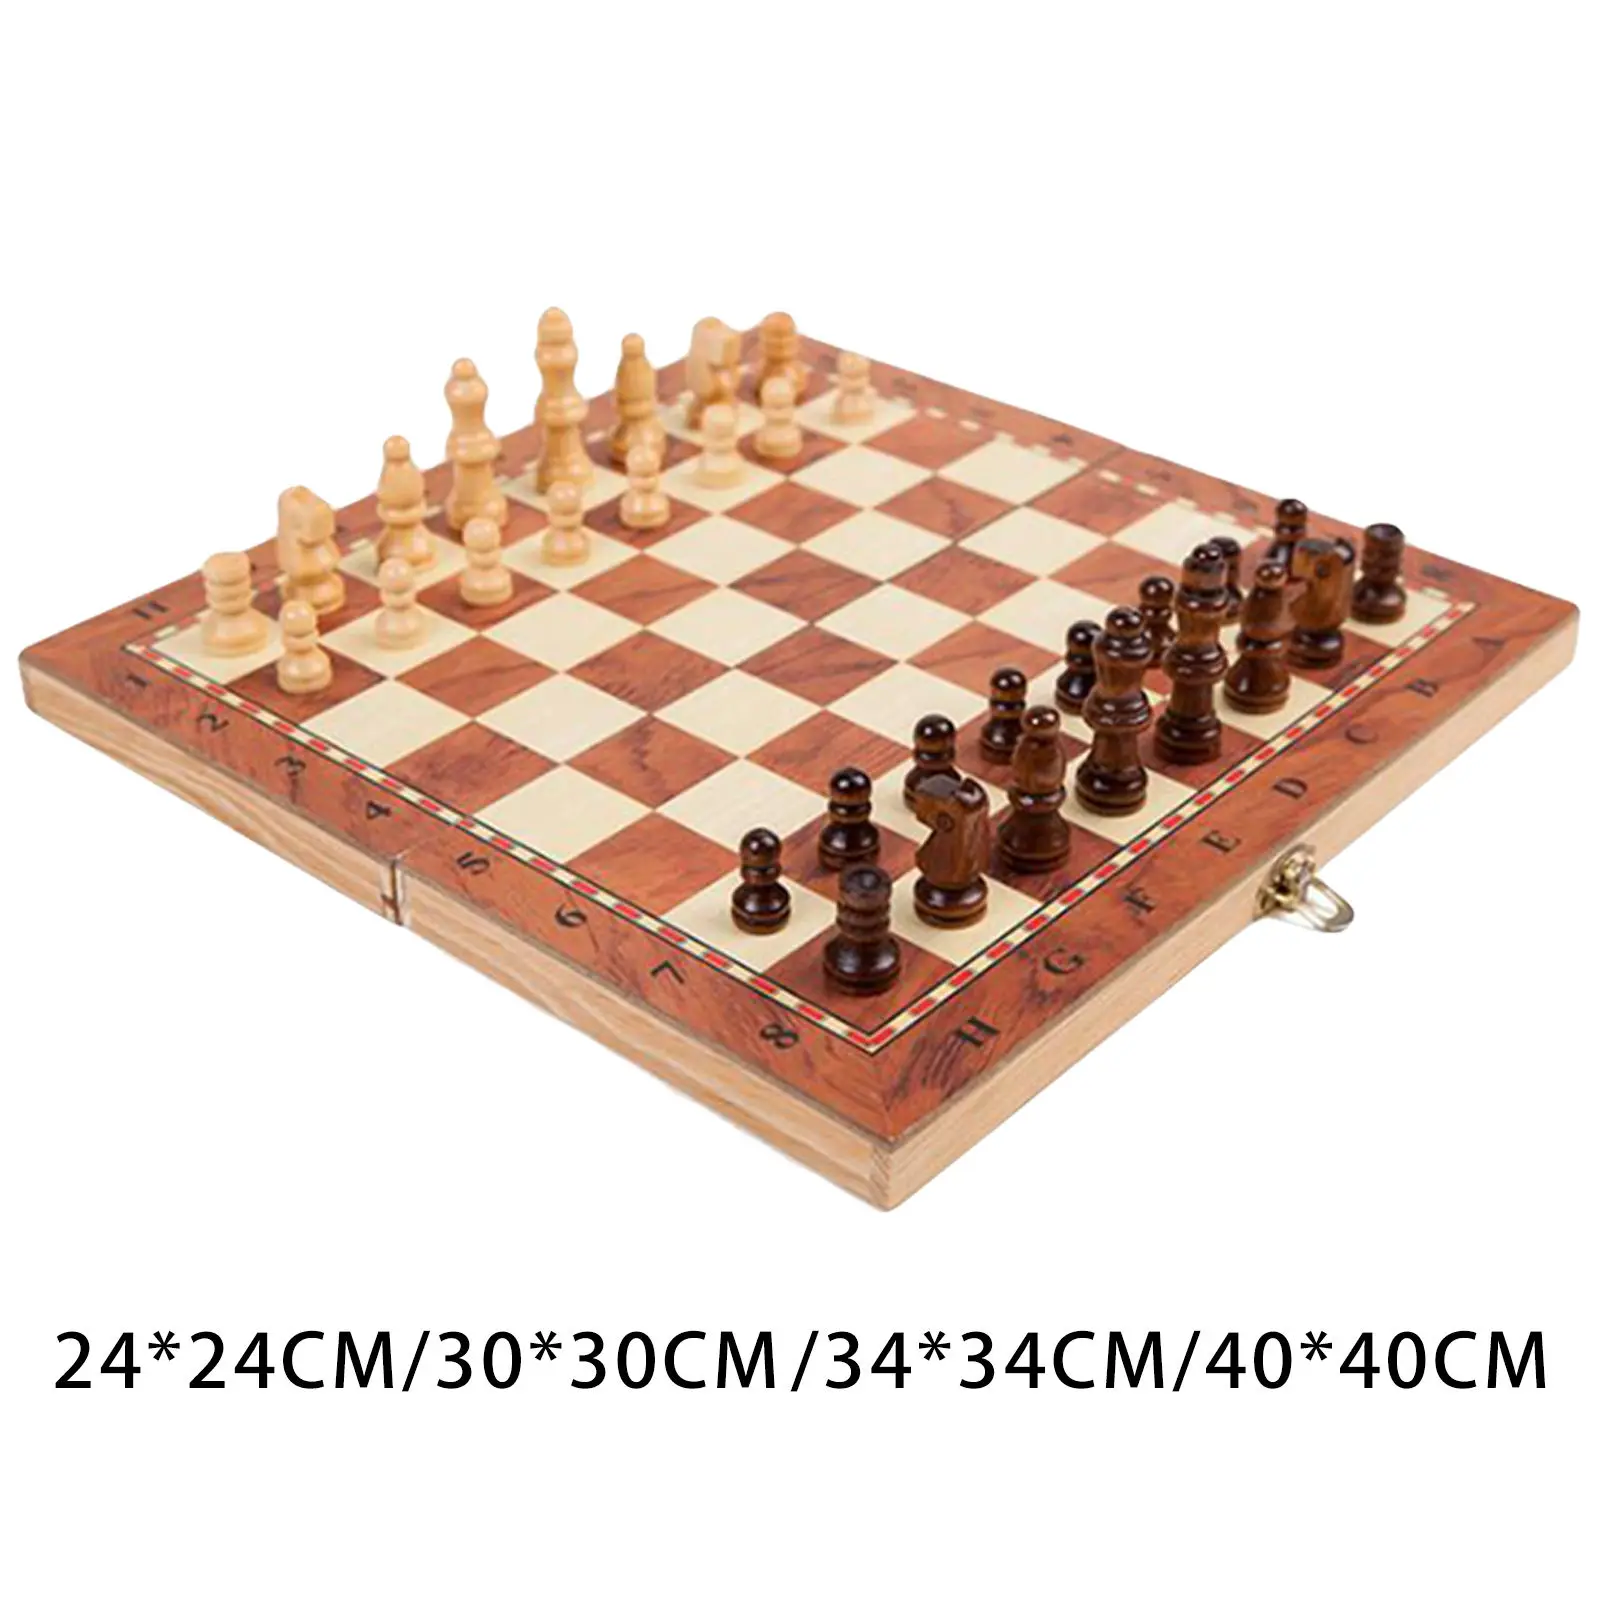 Wooden Chess Set Staunton Educational Toy Foldable Table Game for Adults Chess Lovers